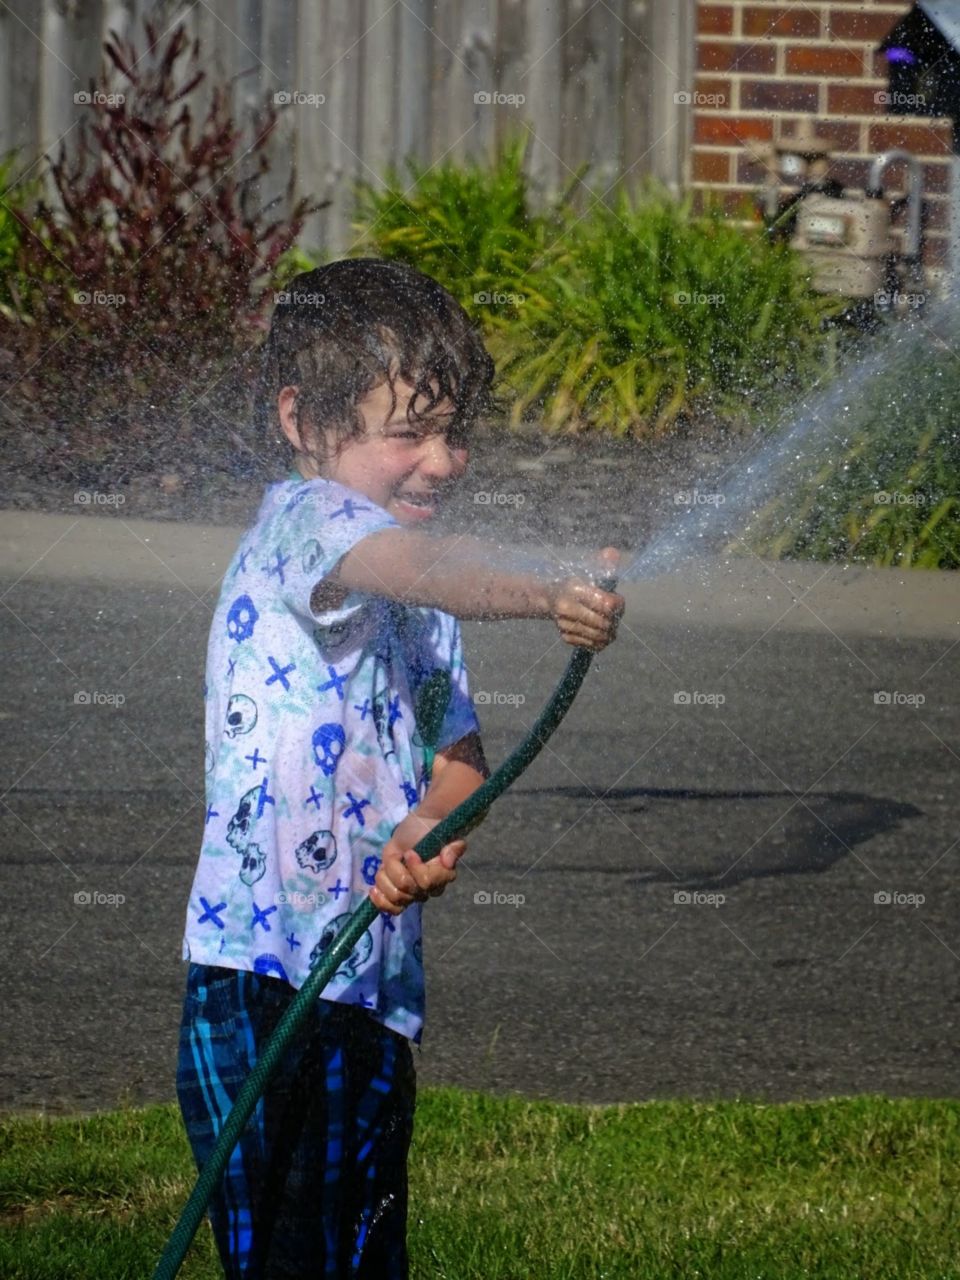 boy playing with the garden hose spraying water up into the sky